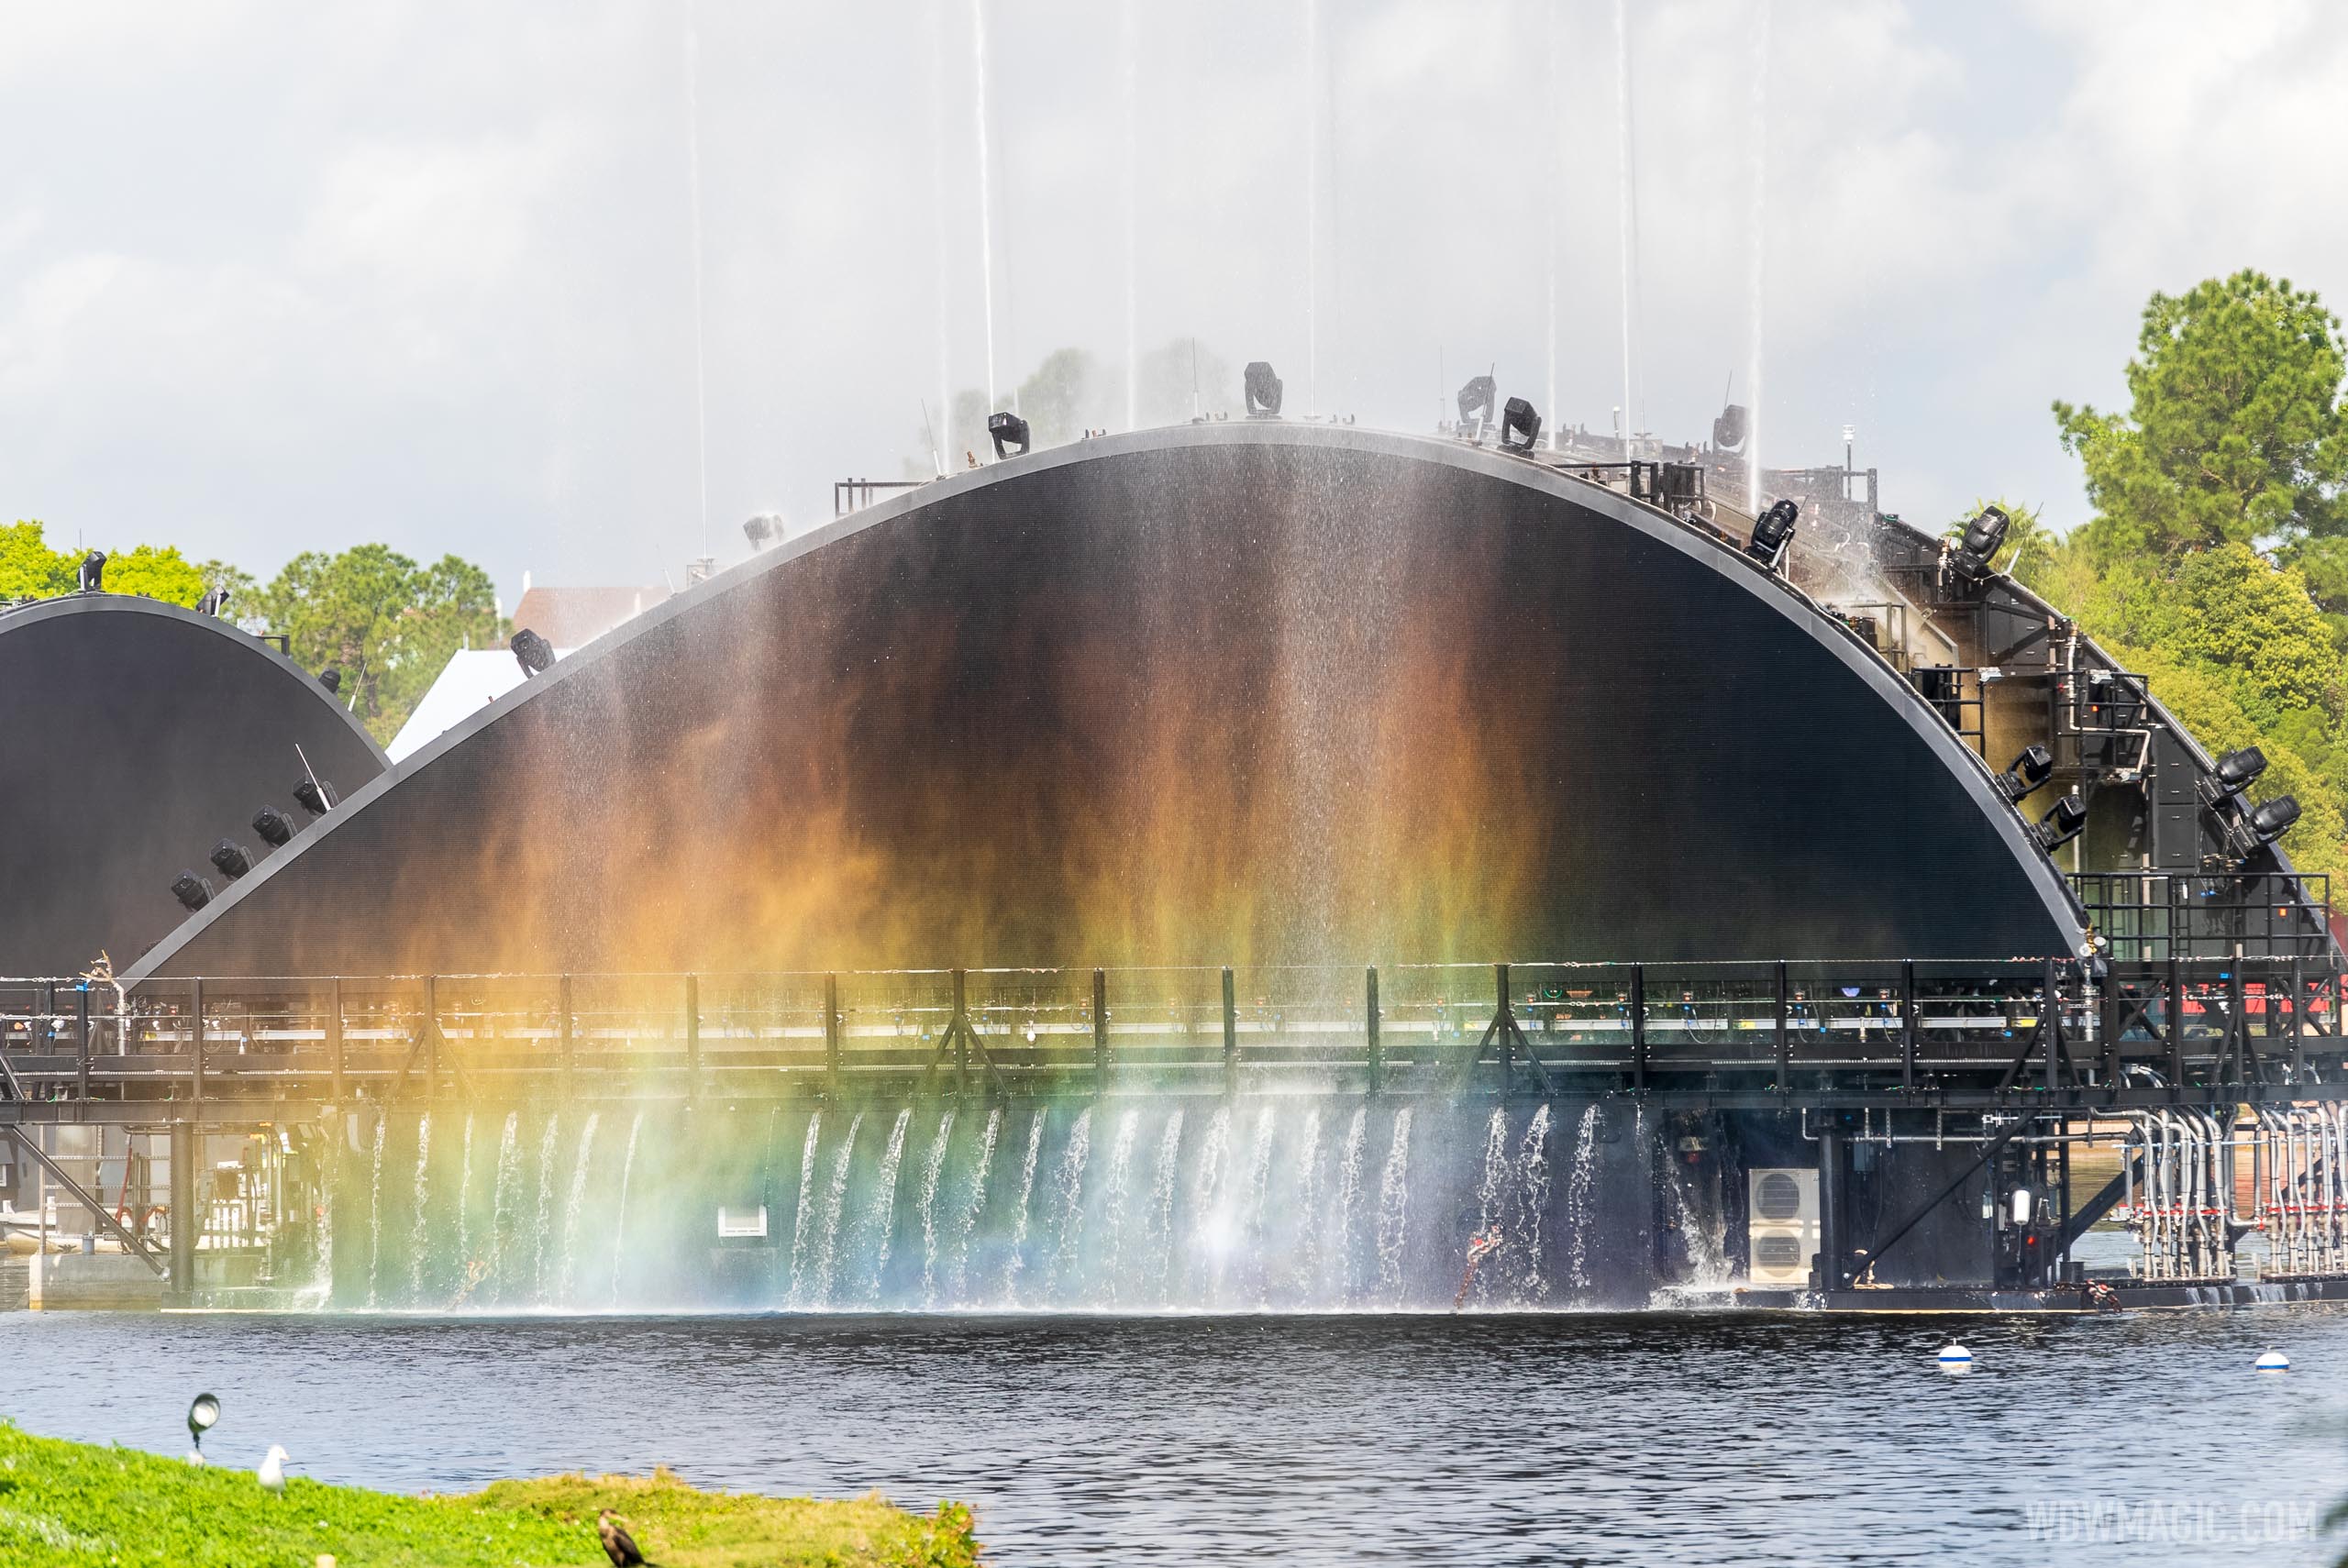 Harmonious Mexico barge fountain test and icon barge lighting test - March 24 2021